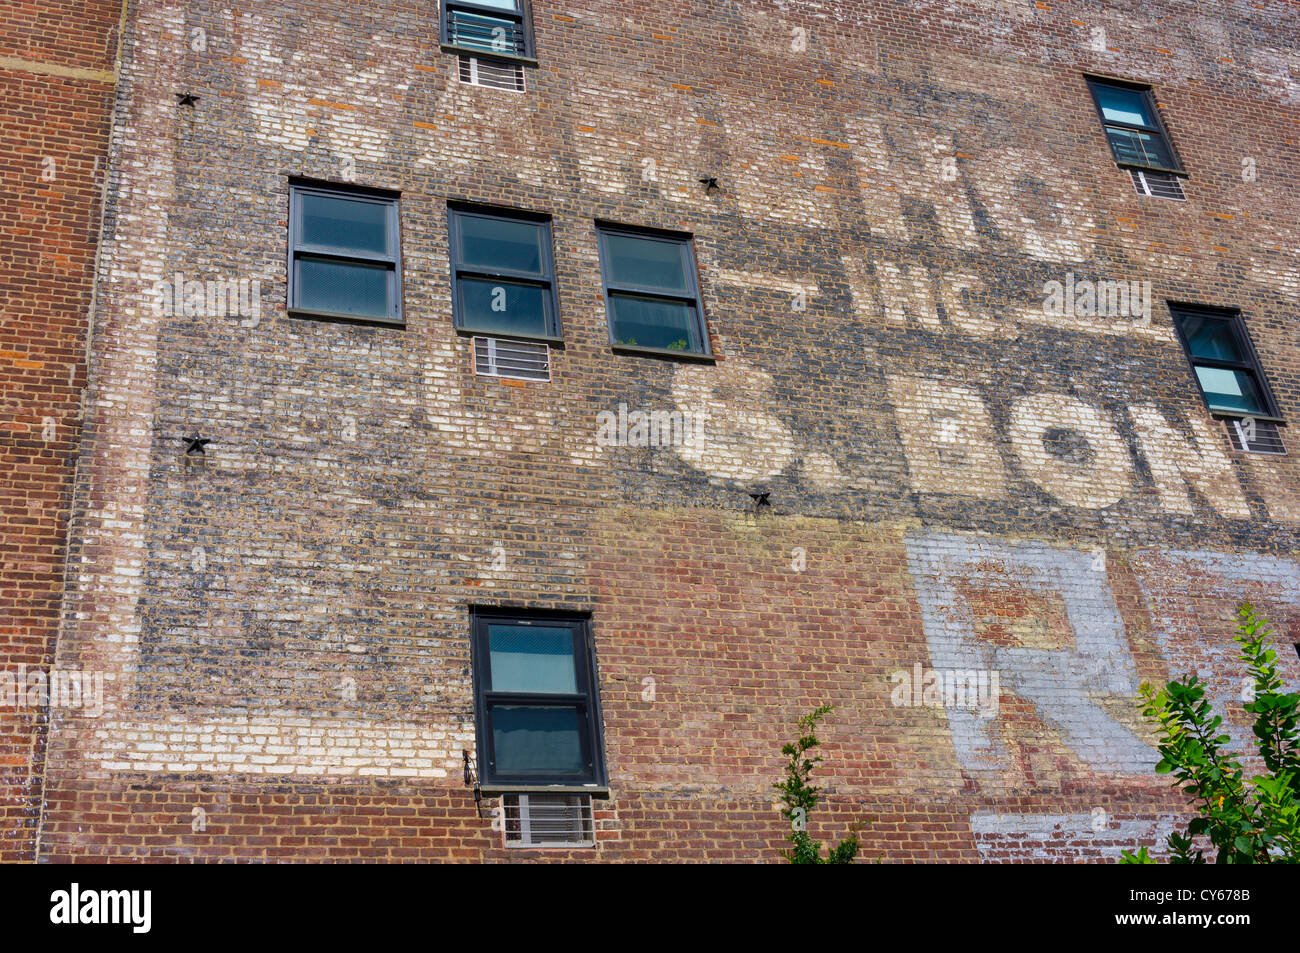 The wall of a former warehouse with faded sign writing seen from the High Line city park, New York. Stock Photo